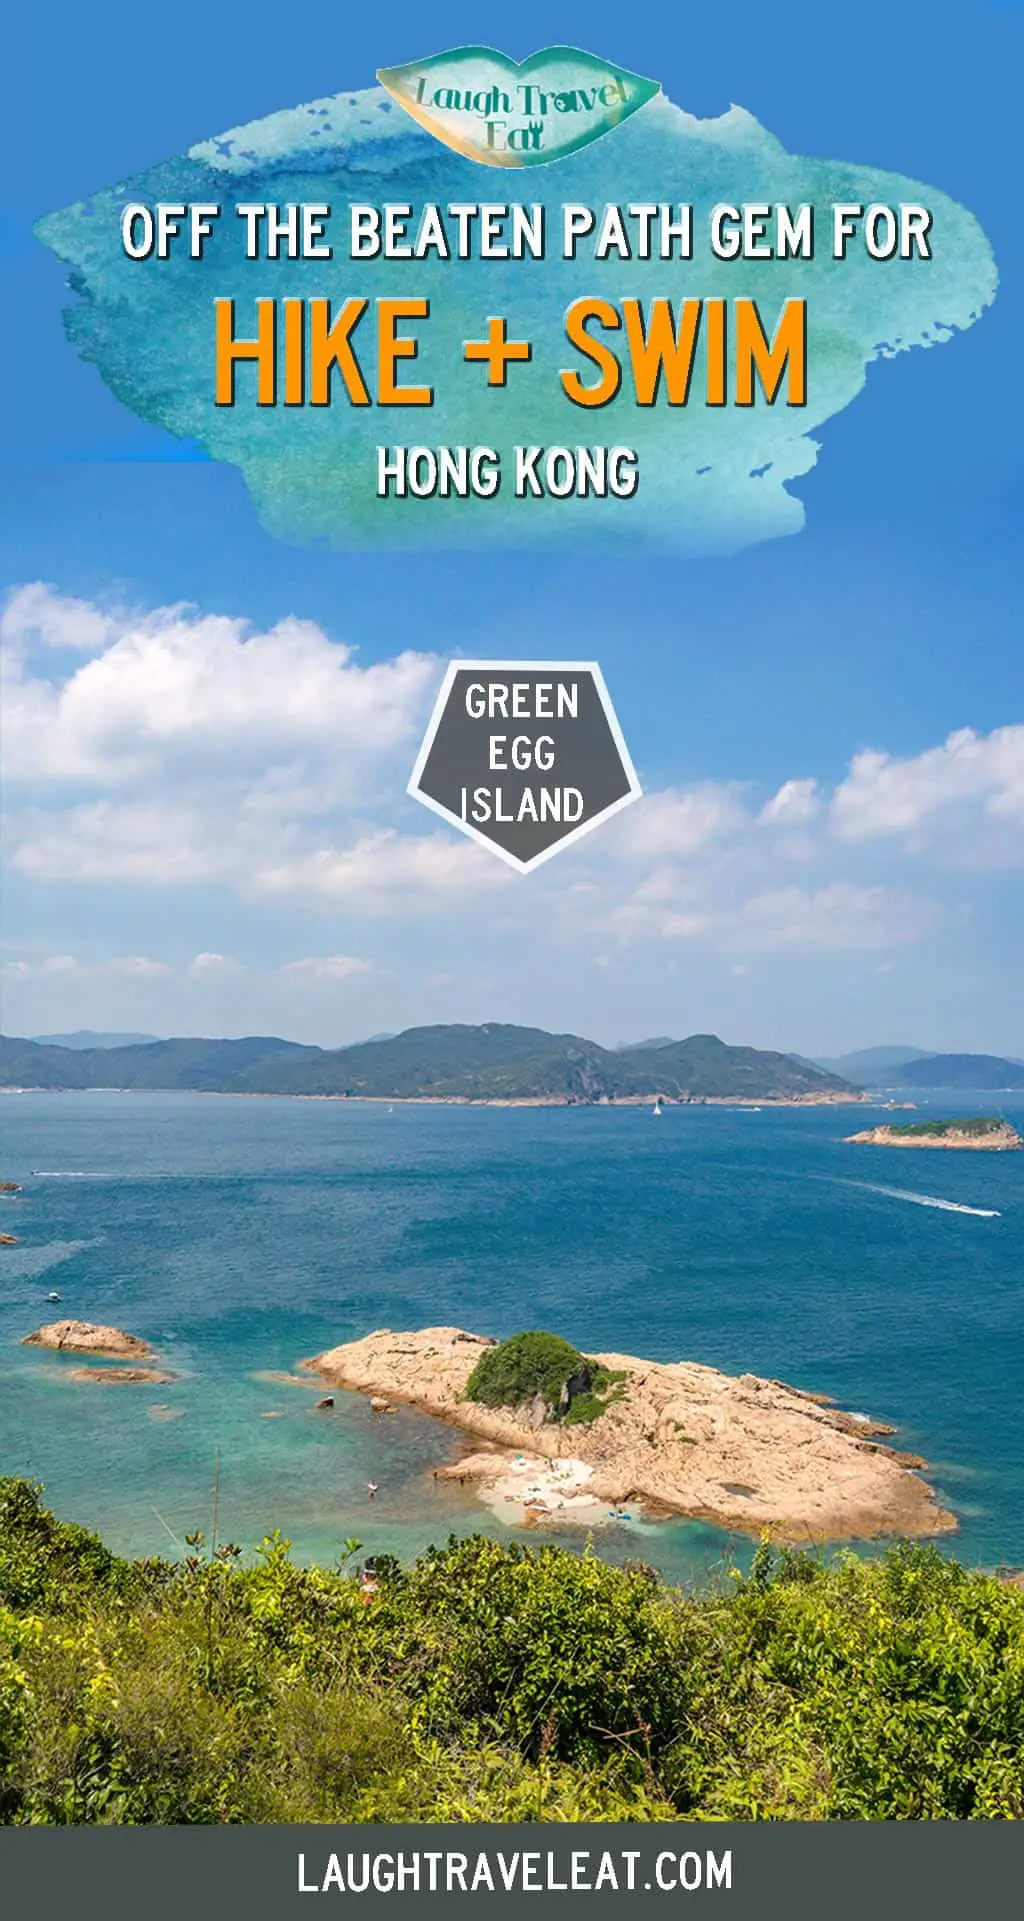 Looking for a hidden oasis for some hike + swim action in the busy Hong Kong? The Green Egg Island is the locals' best kept secret off Clear Water Bay. Here's how to get there and what to expect: #HongKong #hike #swim #oasis